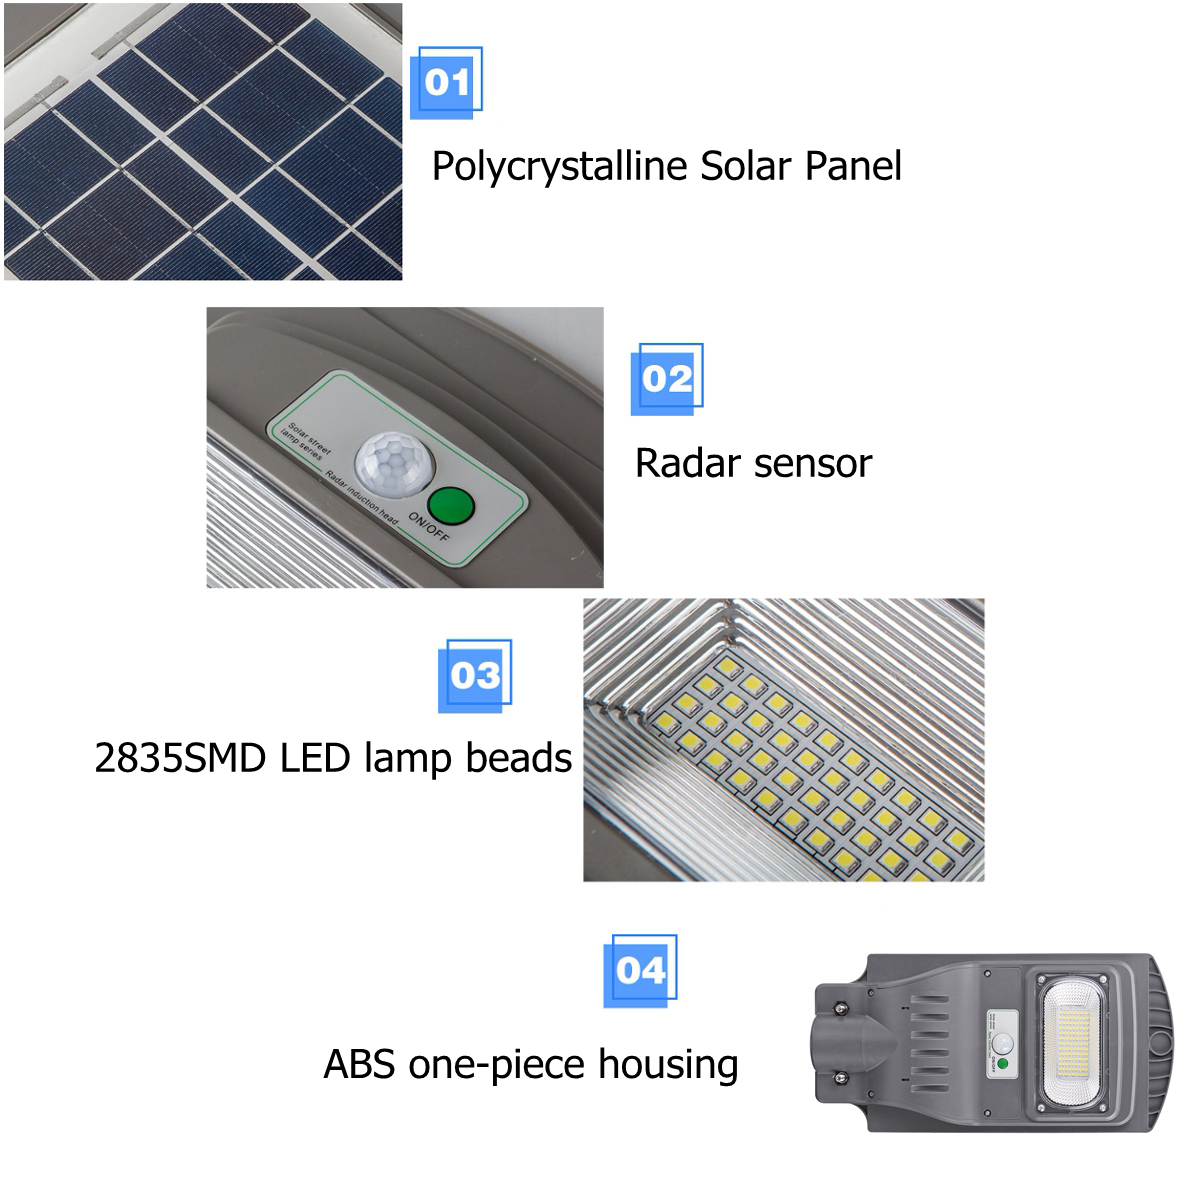 117234351-LED-Solar-Wall-Street-Light-PIR-Motion-Sensor-Outdoor-Lamp-with-Remote-Controller-1694433-7